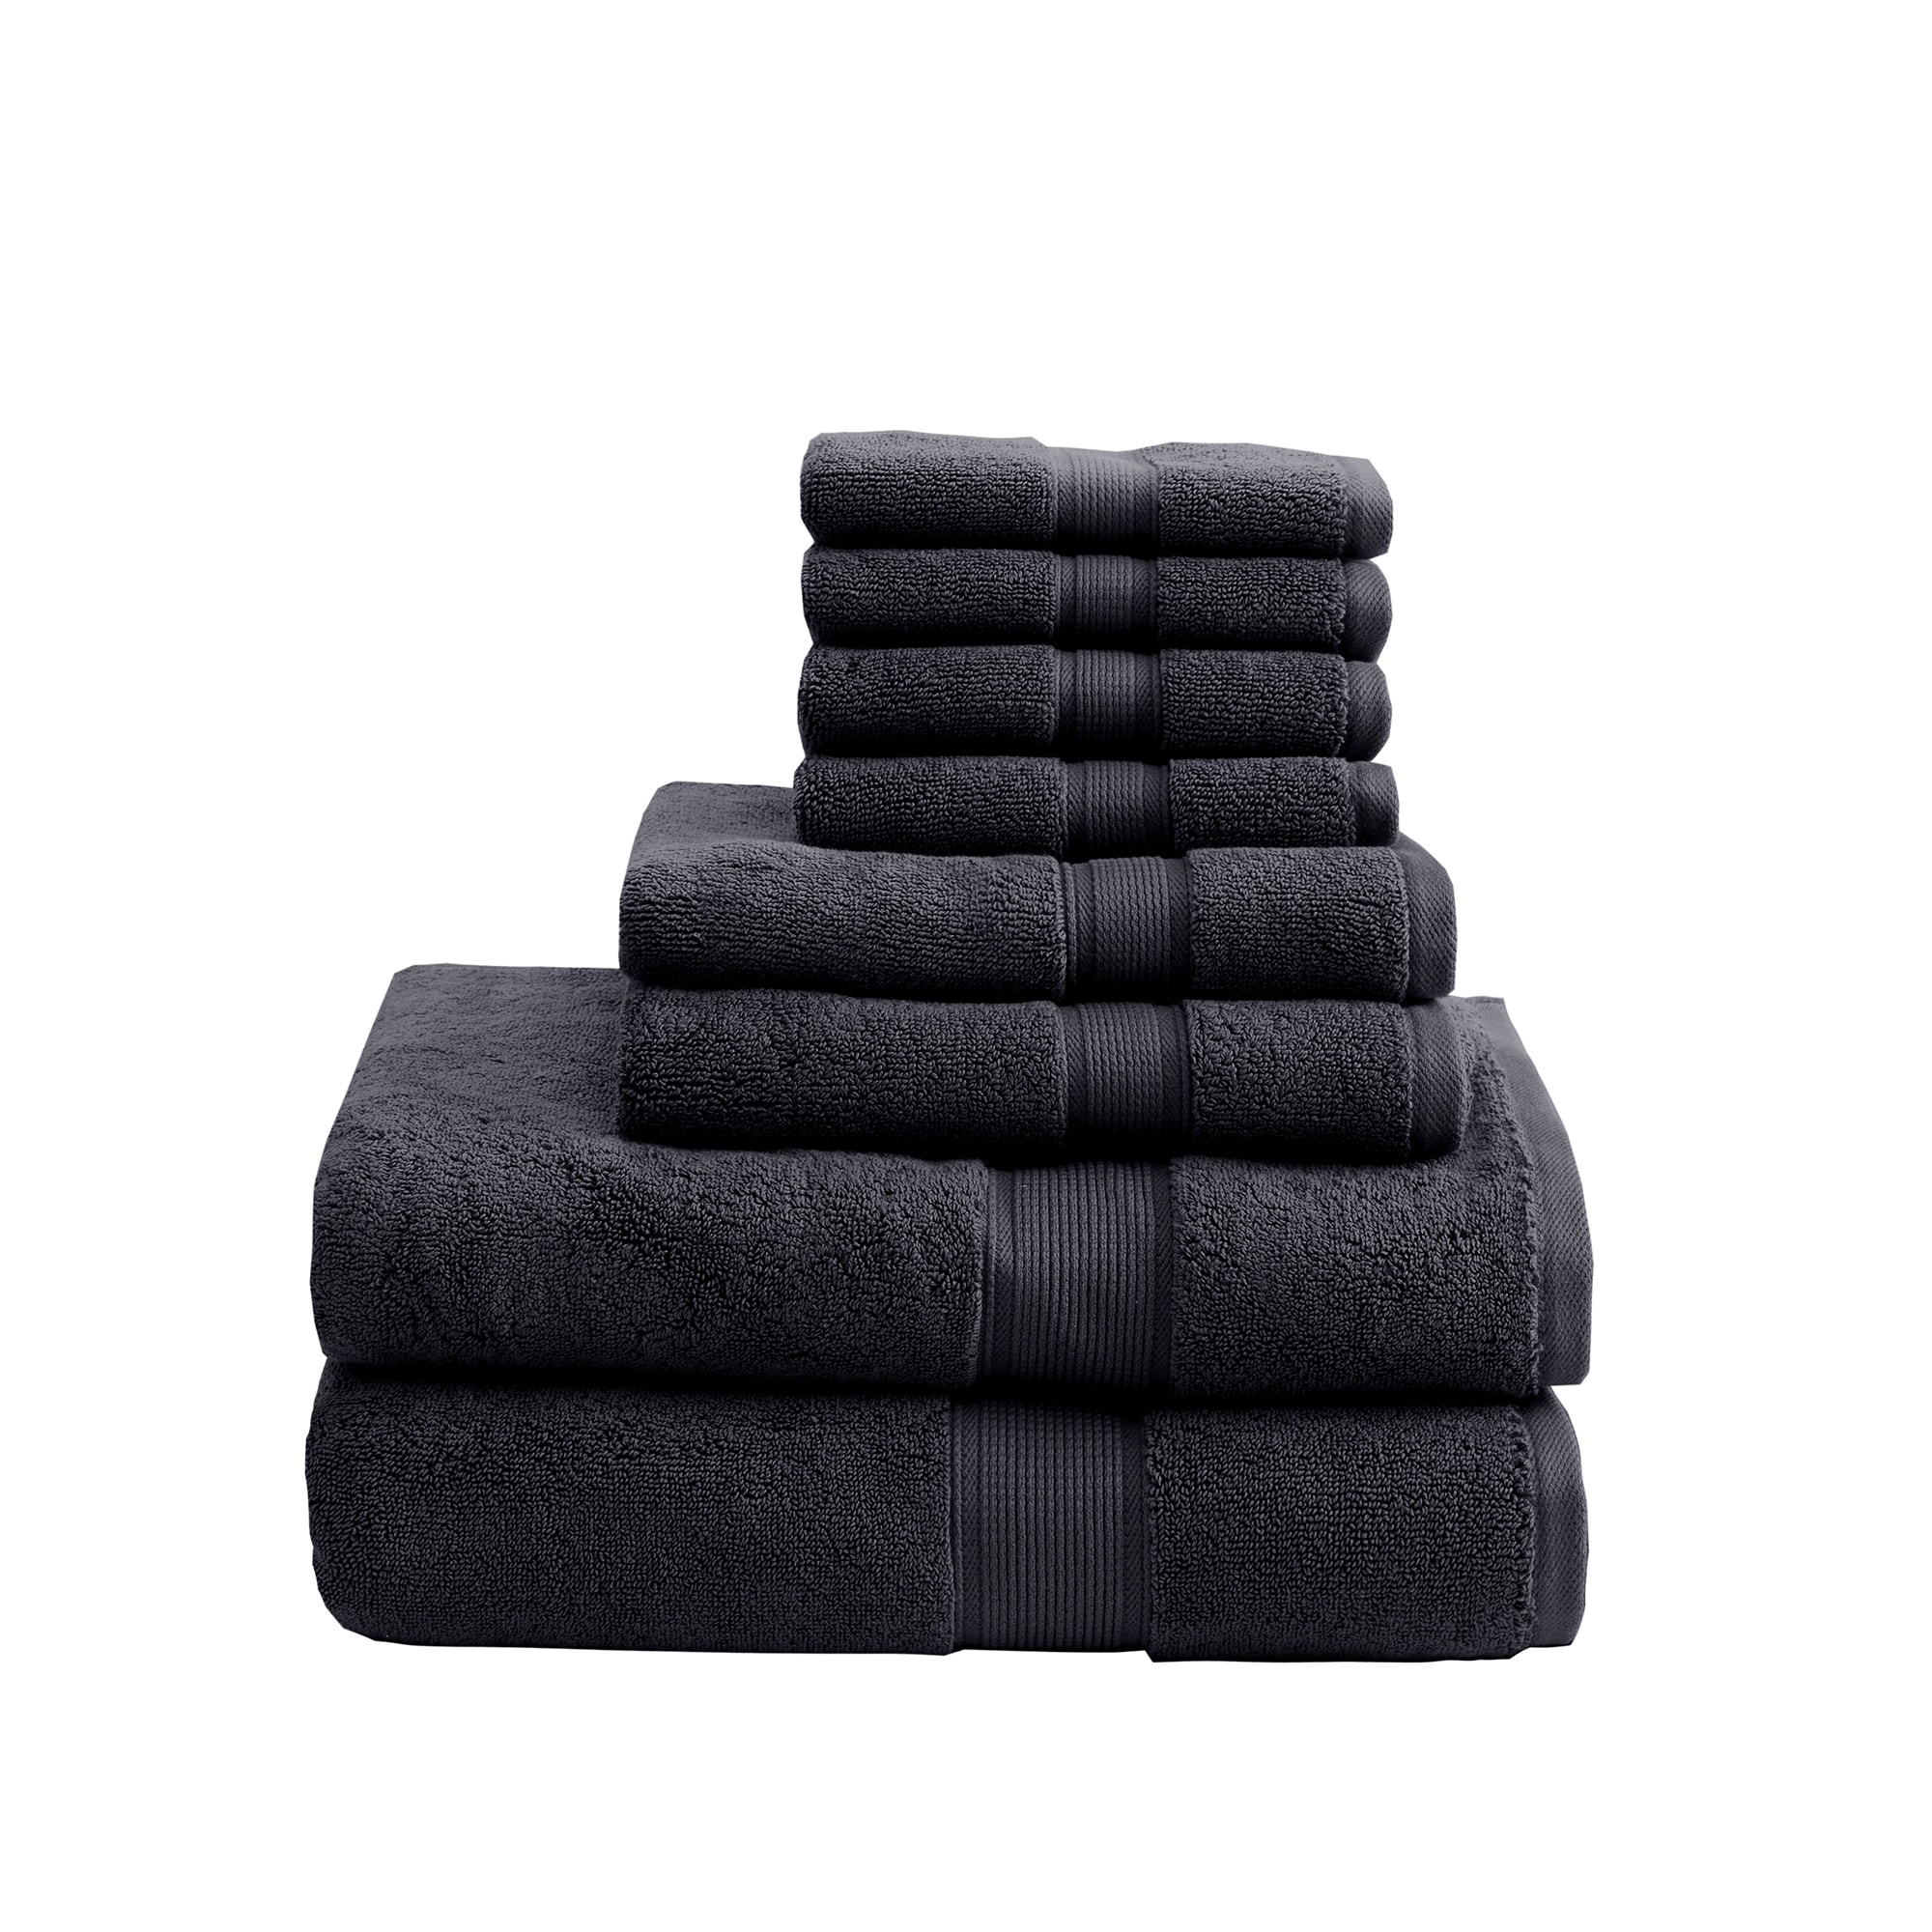 https://ak1.ostkcdn.com/images/products/is/images/direct/41c77853a71fb17aaa26069ff919a311ba71bb36/Madison-Park-Signature-800-GSM-Cotton-8-piece-Towel-Set.jpg